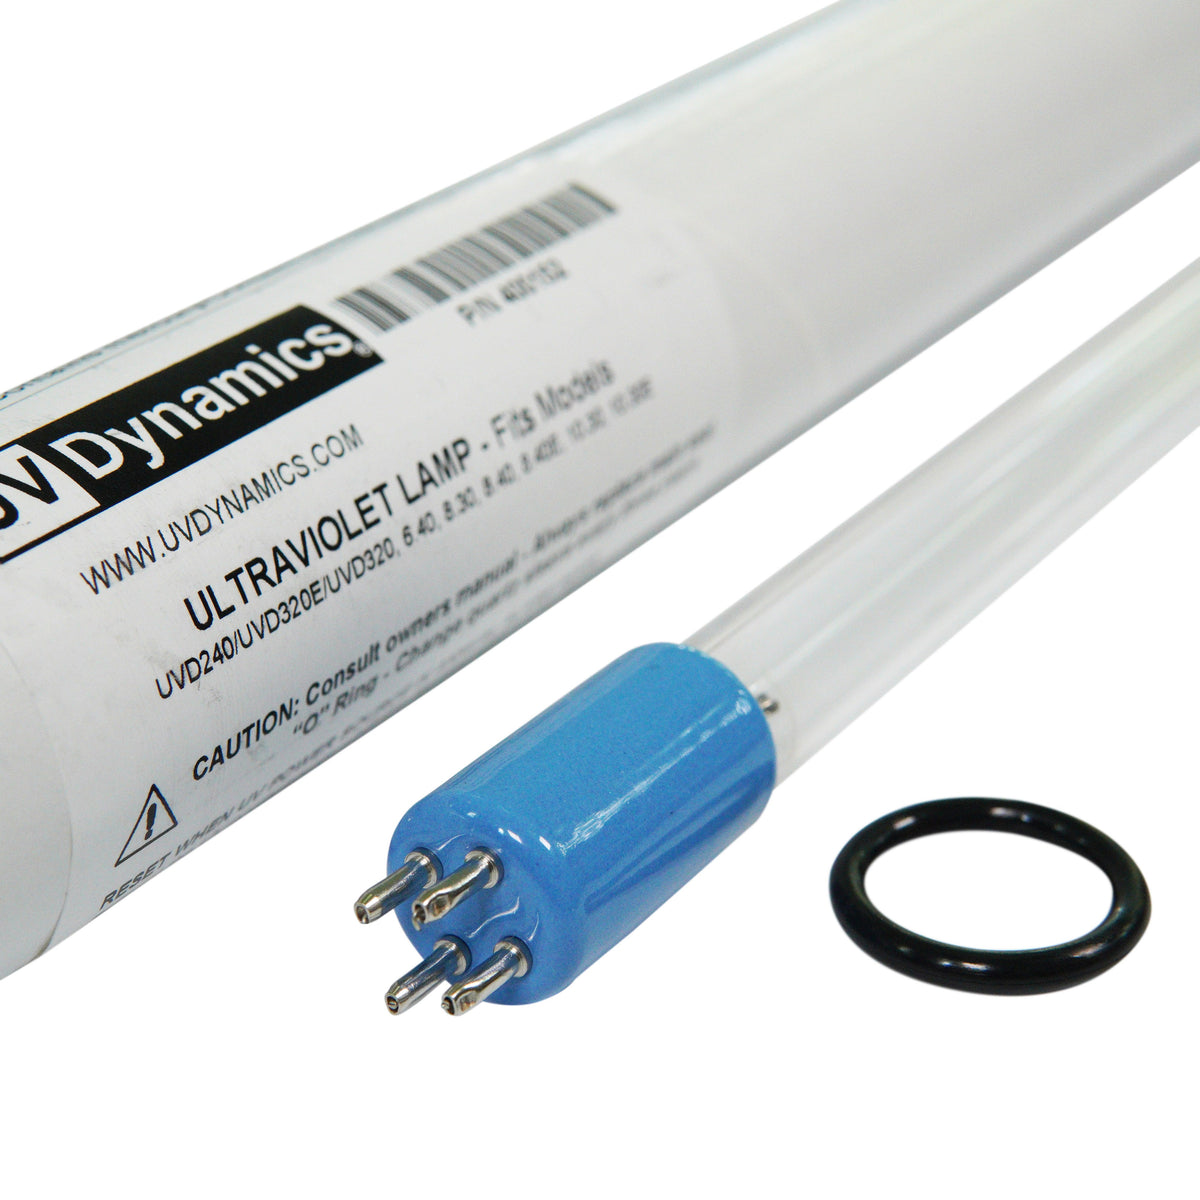 UV Dynamics 400152 Lamp end and label